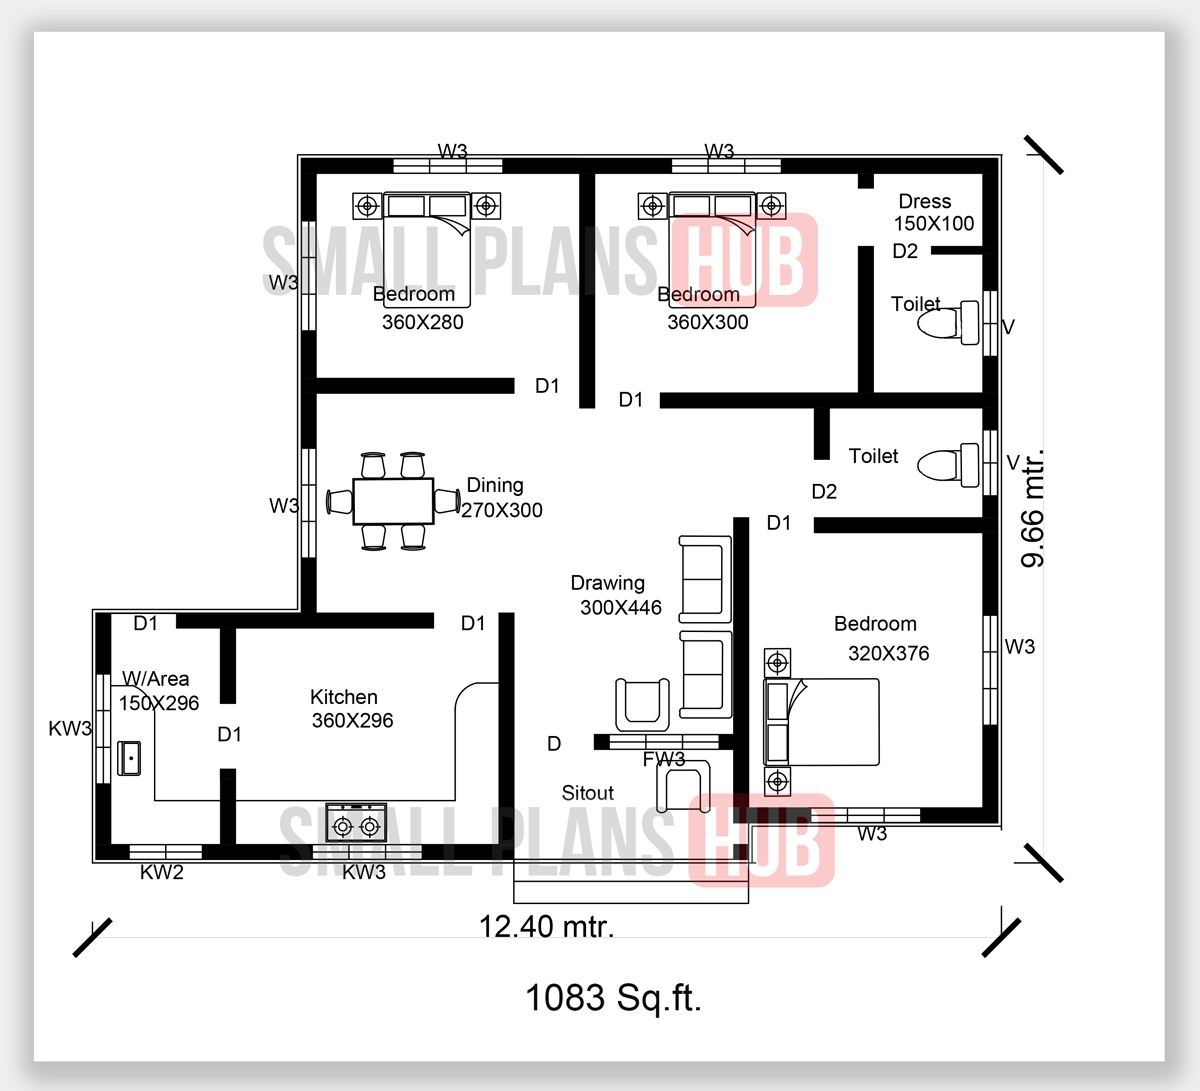 Two Beautiful 3 Bedroom House Plans And Elevation Under 10 Sq Ft 111 Sq M Small Plans Hub